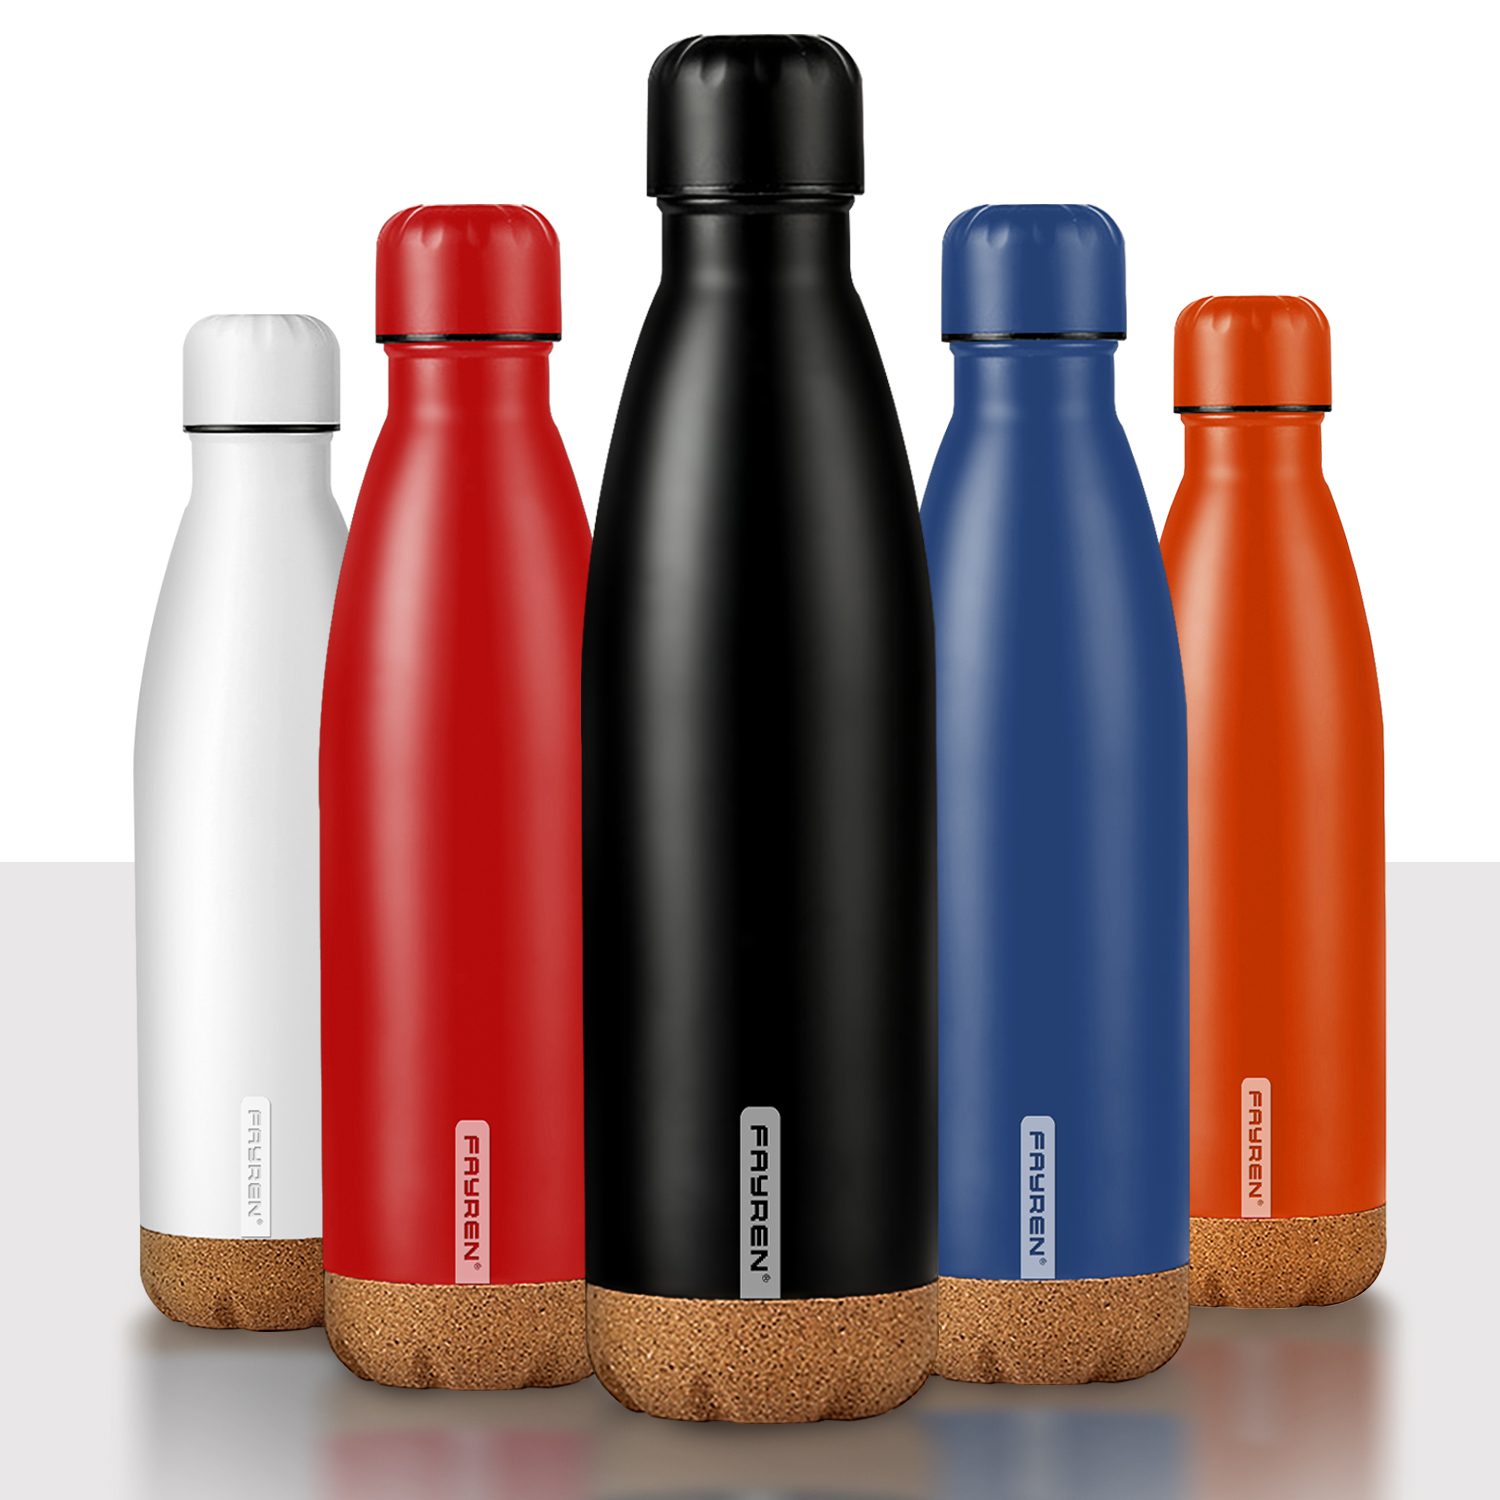 Double Wall 304 Stainless Steel Vaccum Insulated Sports Water Bottles